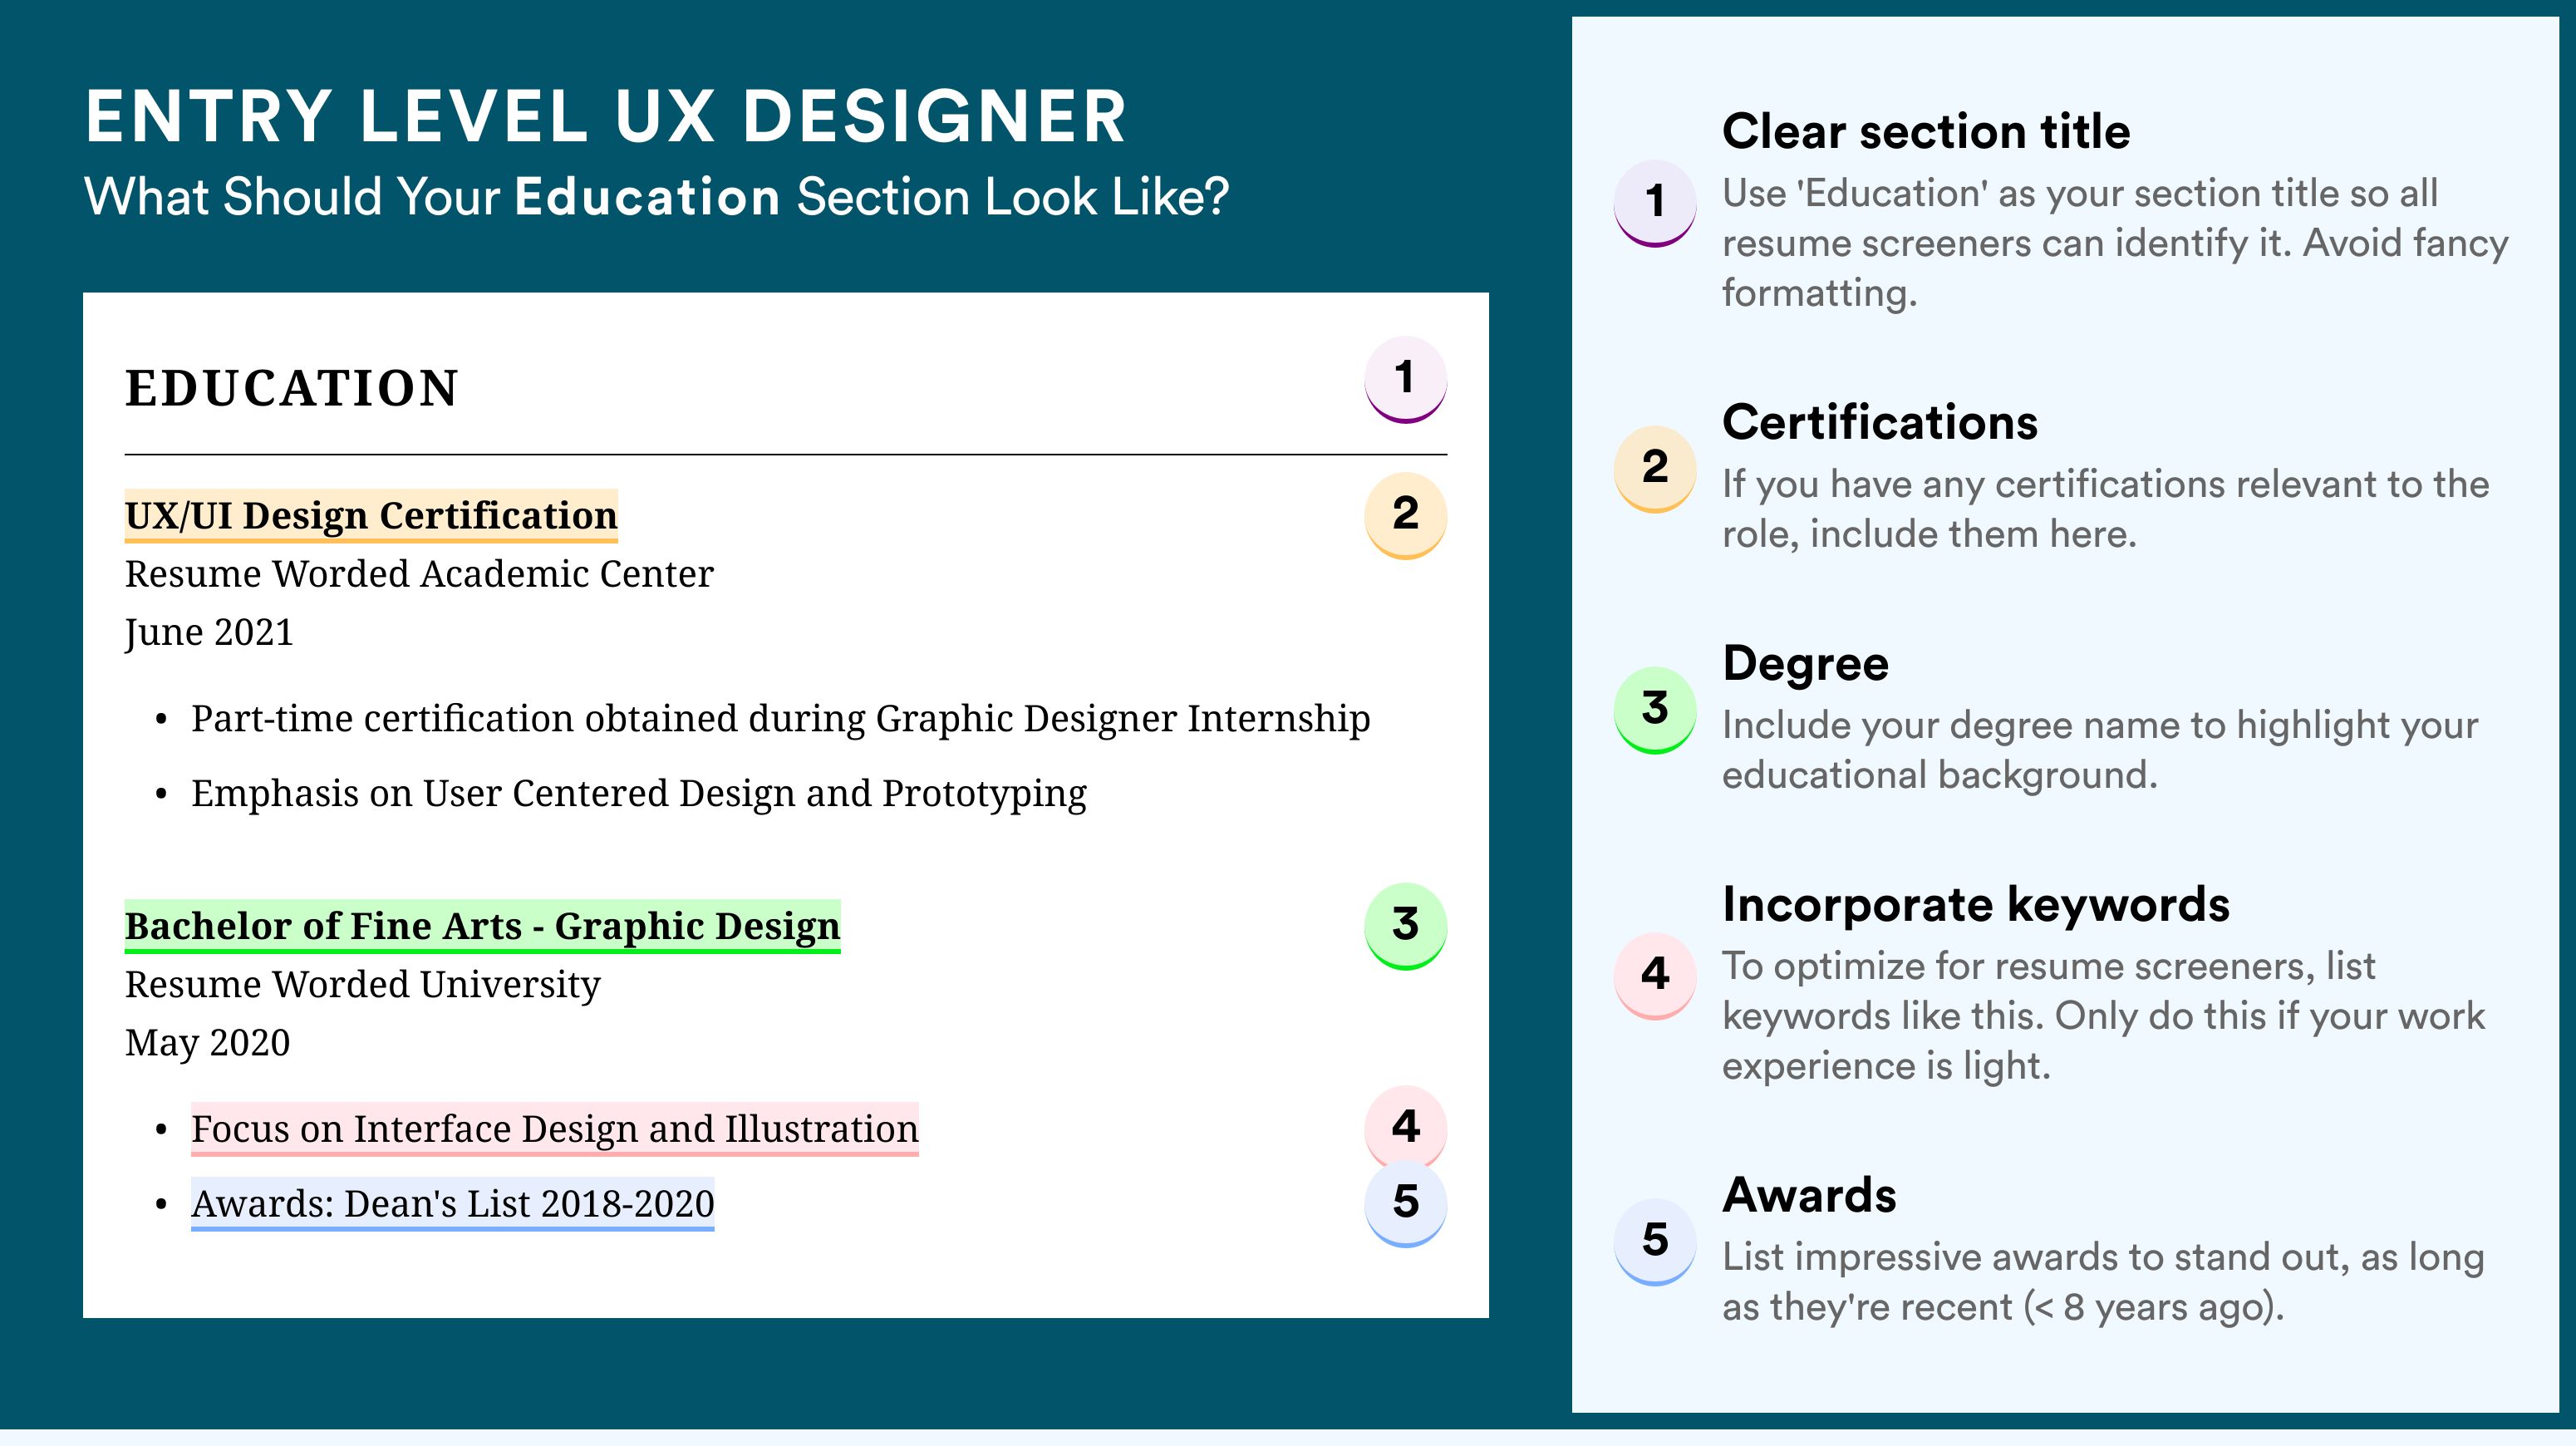 How To Write An Education Section - Entry Level UX Designer Roles